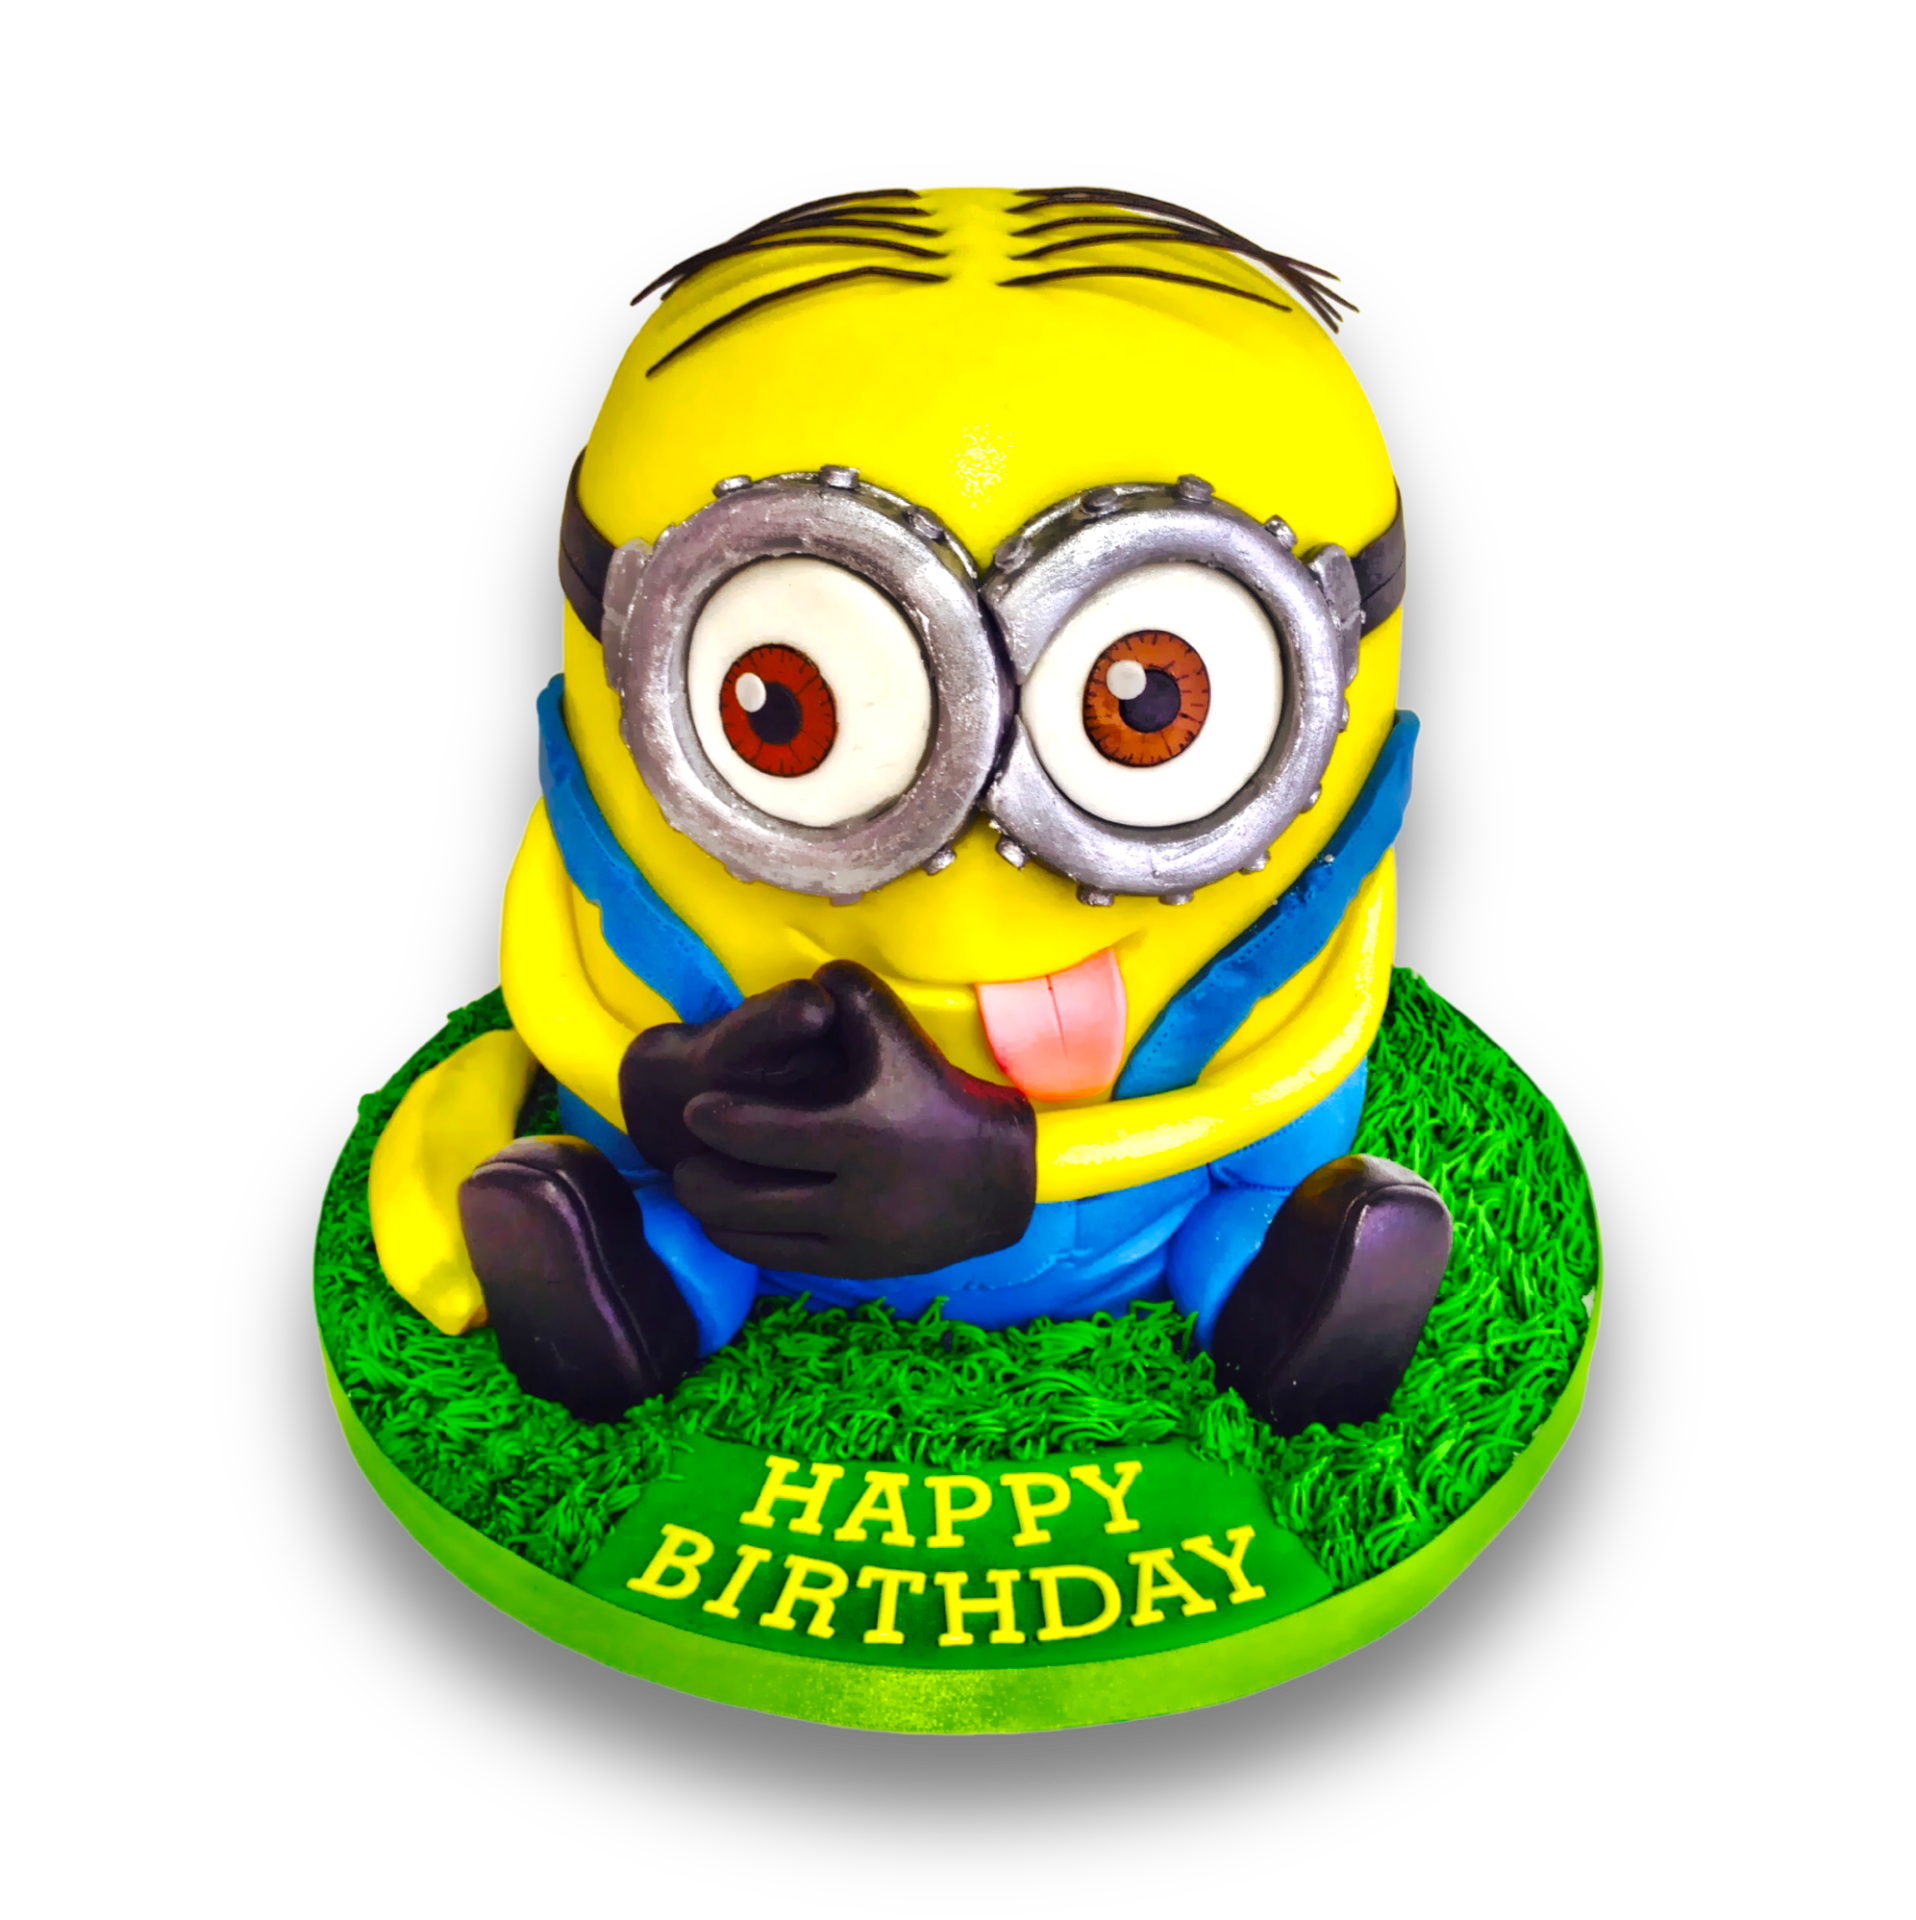 Best Minion Themed Party Cakes in Gurgaon | Gurgaon Bakers